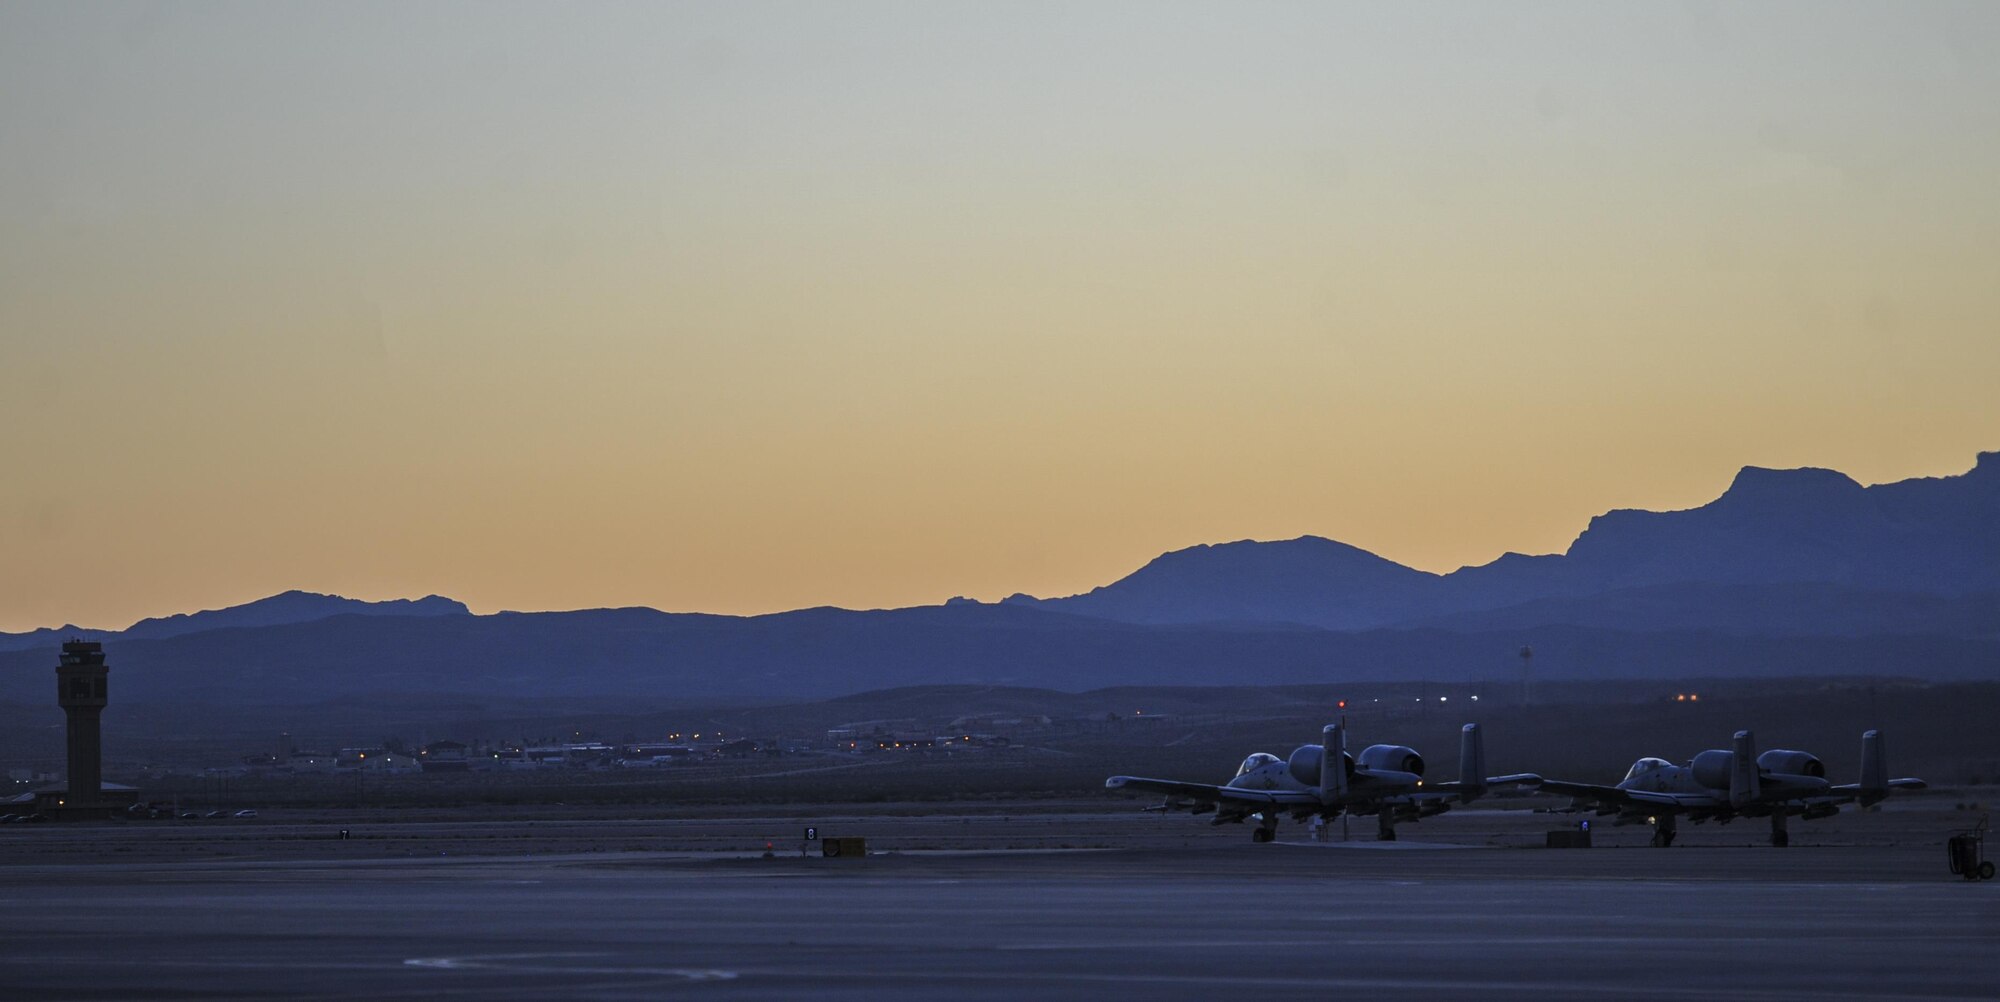 Two A-10 Thunderbolt II assigned to 357th Fighter Squadron, Davis-Monthan Air Force Base, Ariz., wait to takeoff at Nellis Air Force Base, Nev., Oct. 4, 2016. The A-10 can loiter near battle areas for extended periods of time and operate in low ceiling and visibility conditions. (U.S. Air Force photo by Airman 1st Class Kevin Tanenbaum/Released)